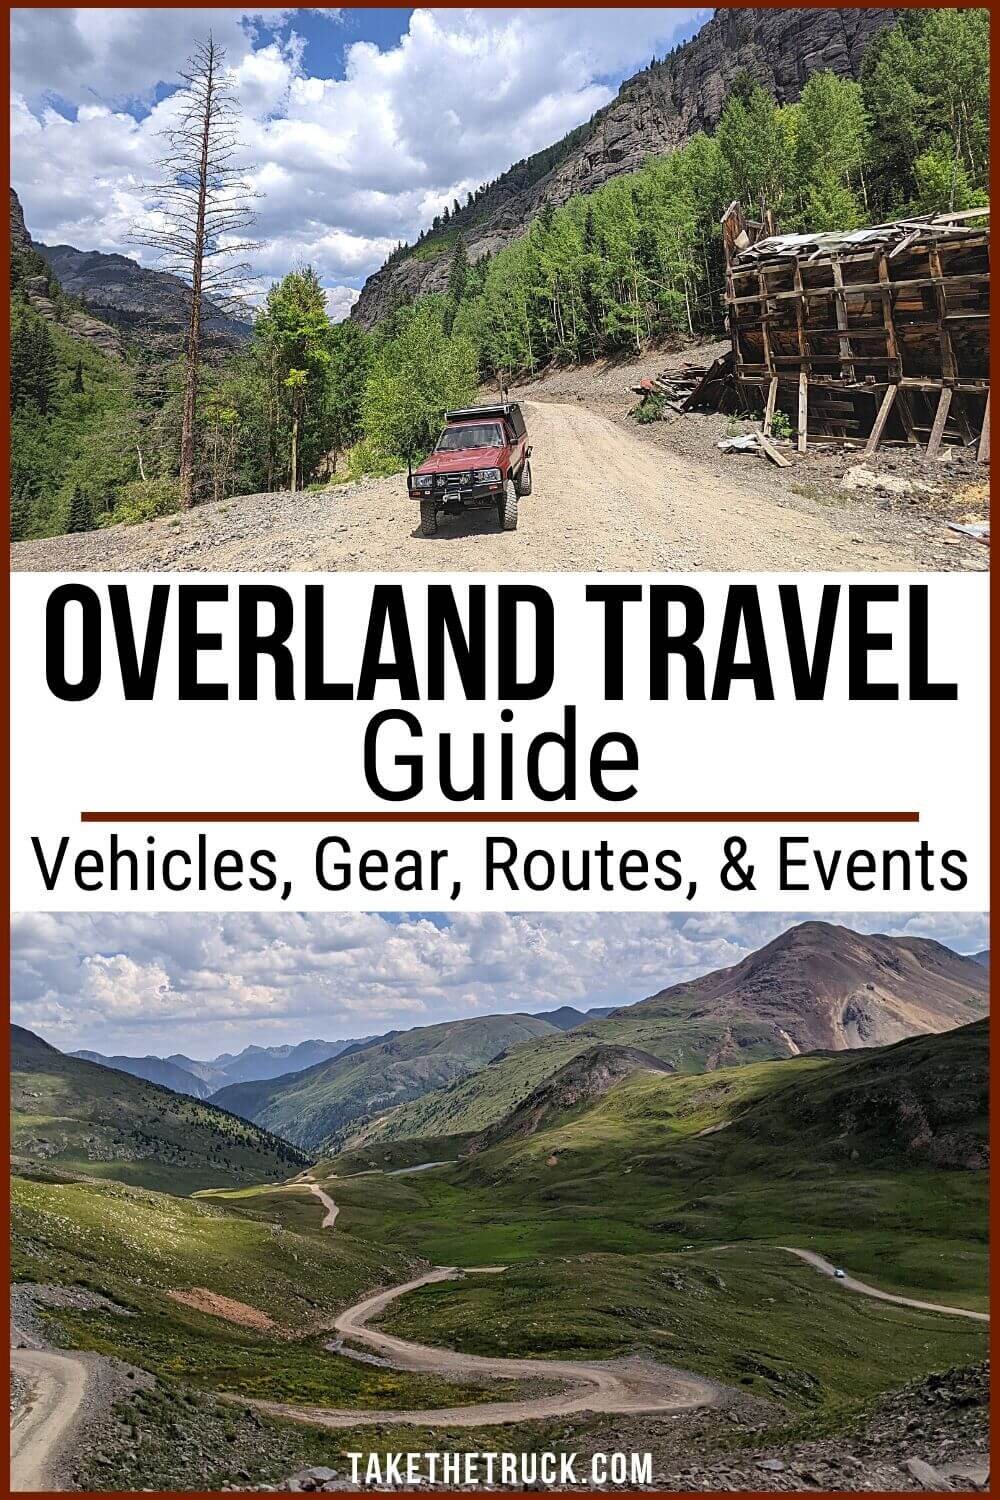 Overlanding &amp; overland travel resource: overlanding for beginners, budget overlanding, overlanding recovery &amp; gear, overland vehicles, overlanding routes &amp; destinations, overlanding tips